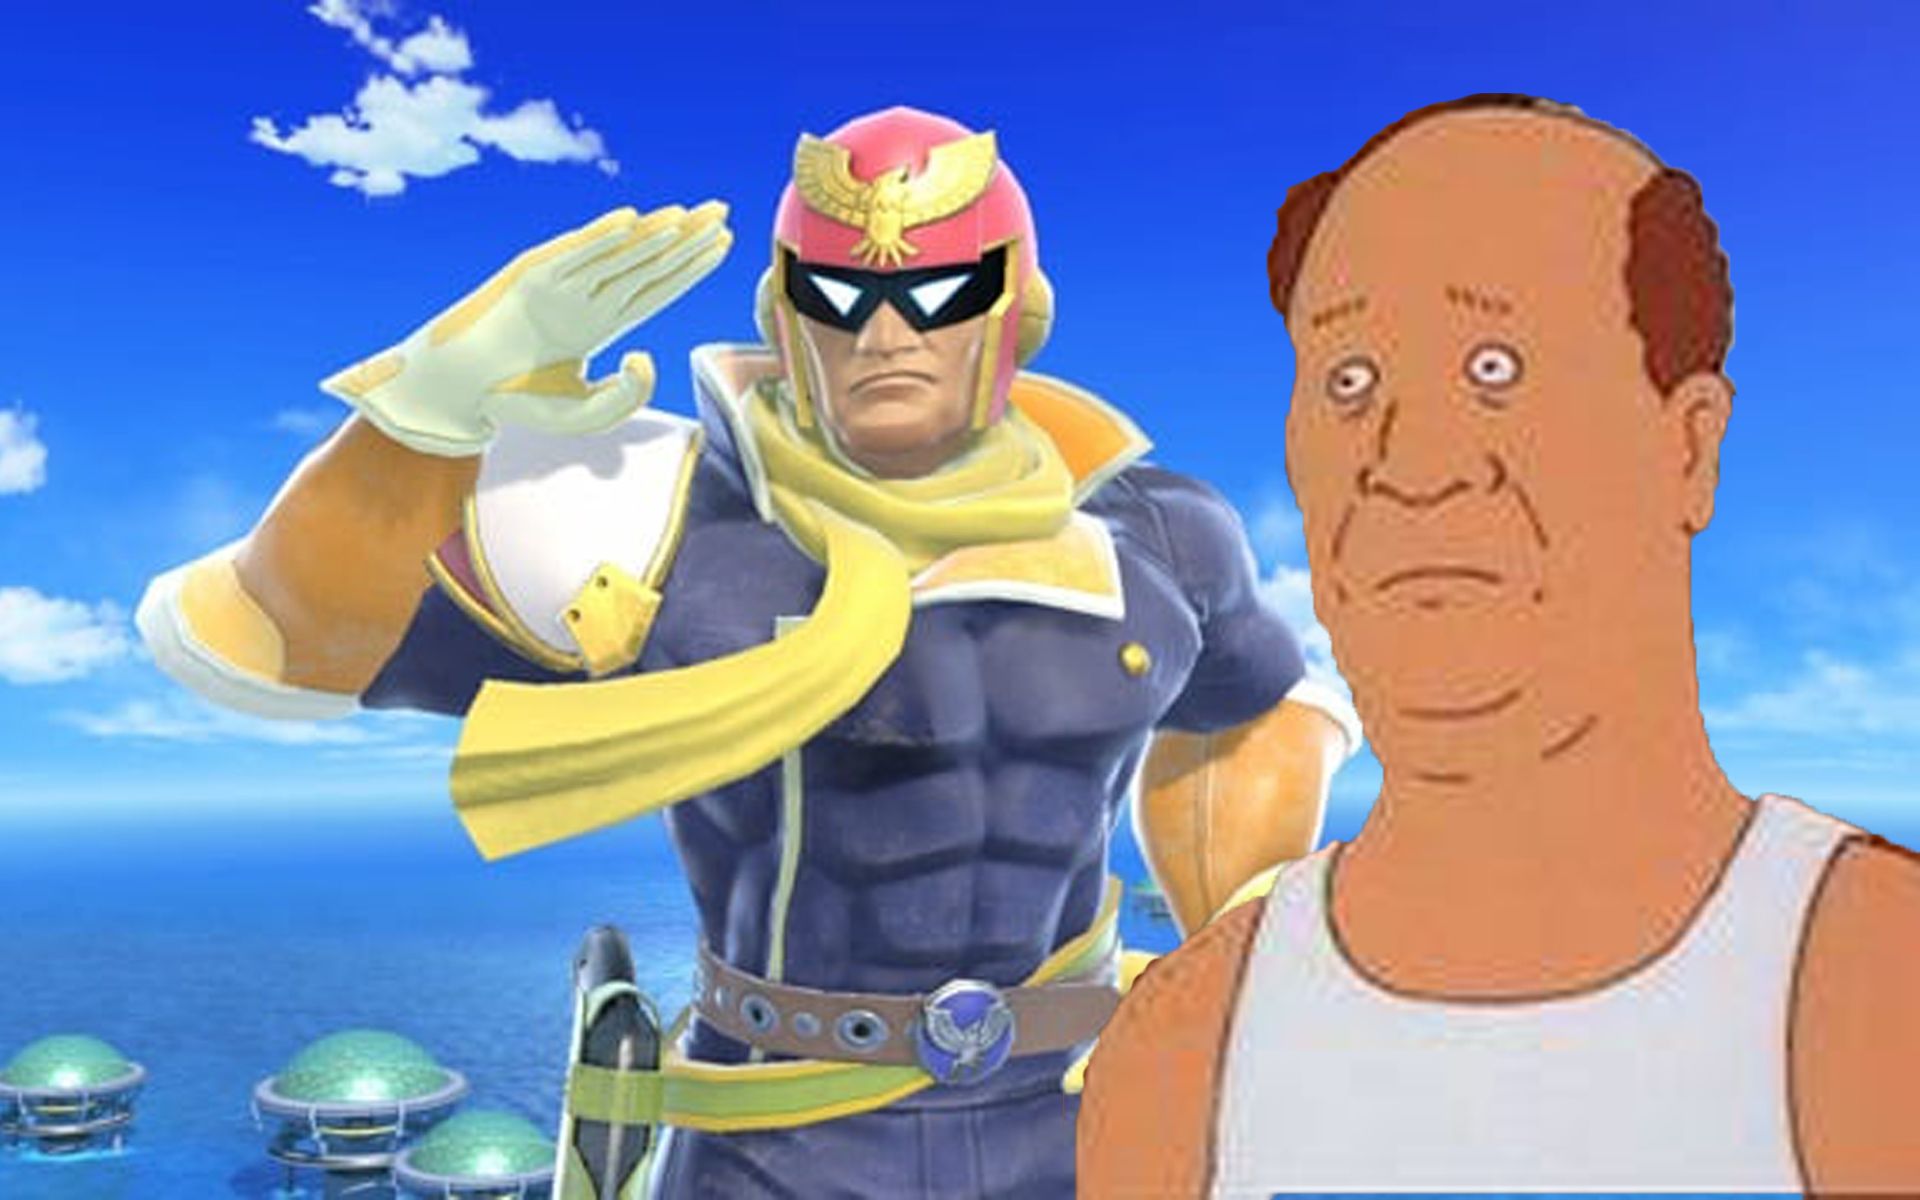 Nintendo: Captain Falcon Is Bill From King Of The Hill, No New Game Coming